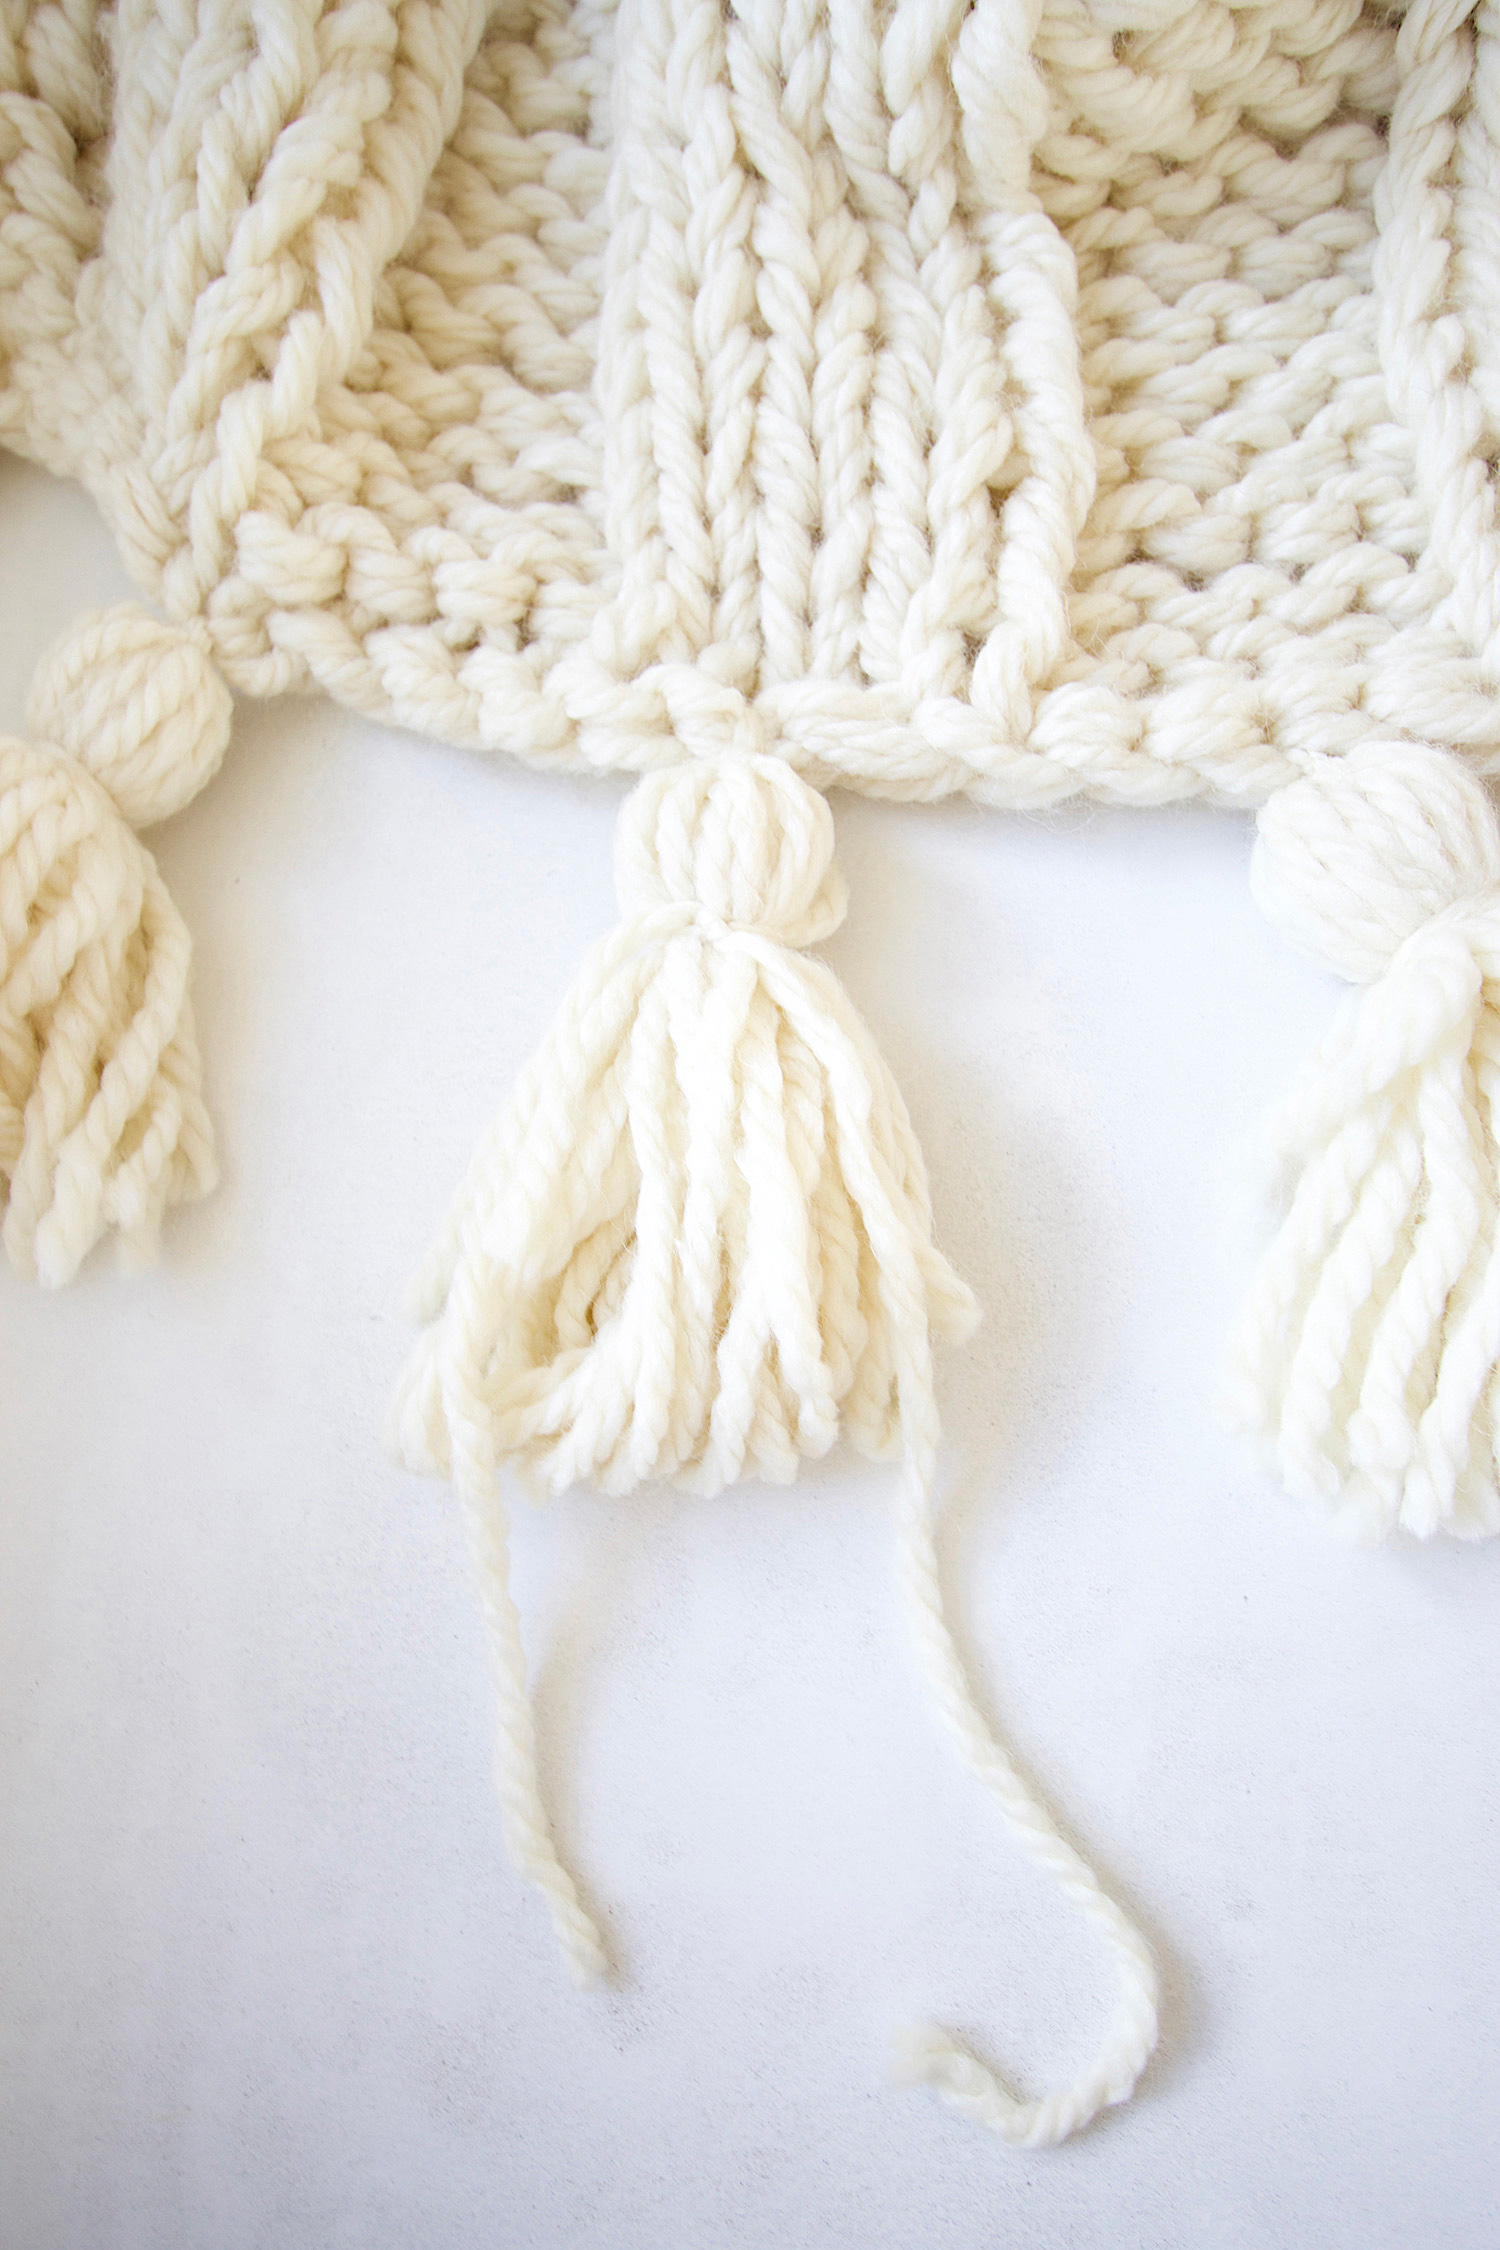 How to make wool tassels for your chunky knit blanket. A step by step